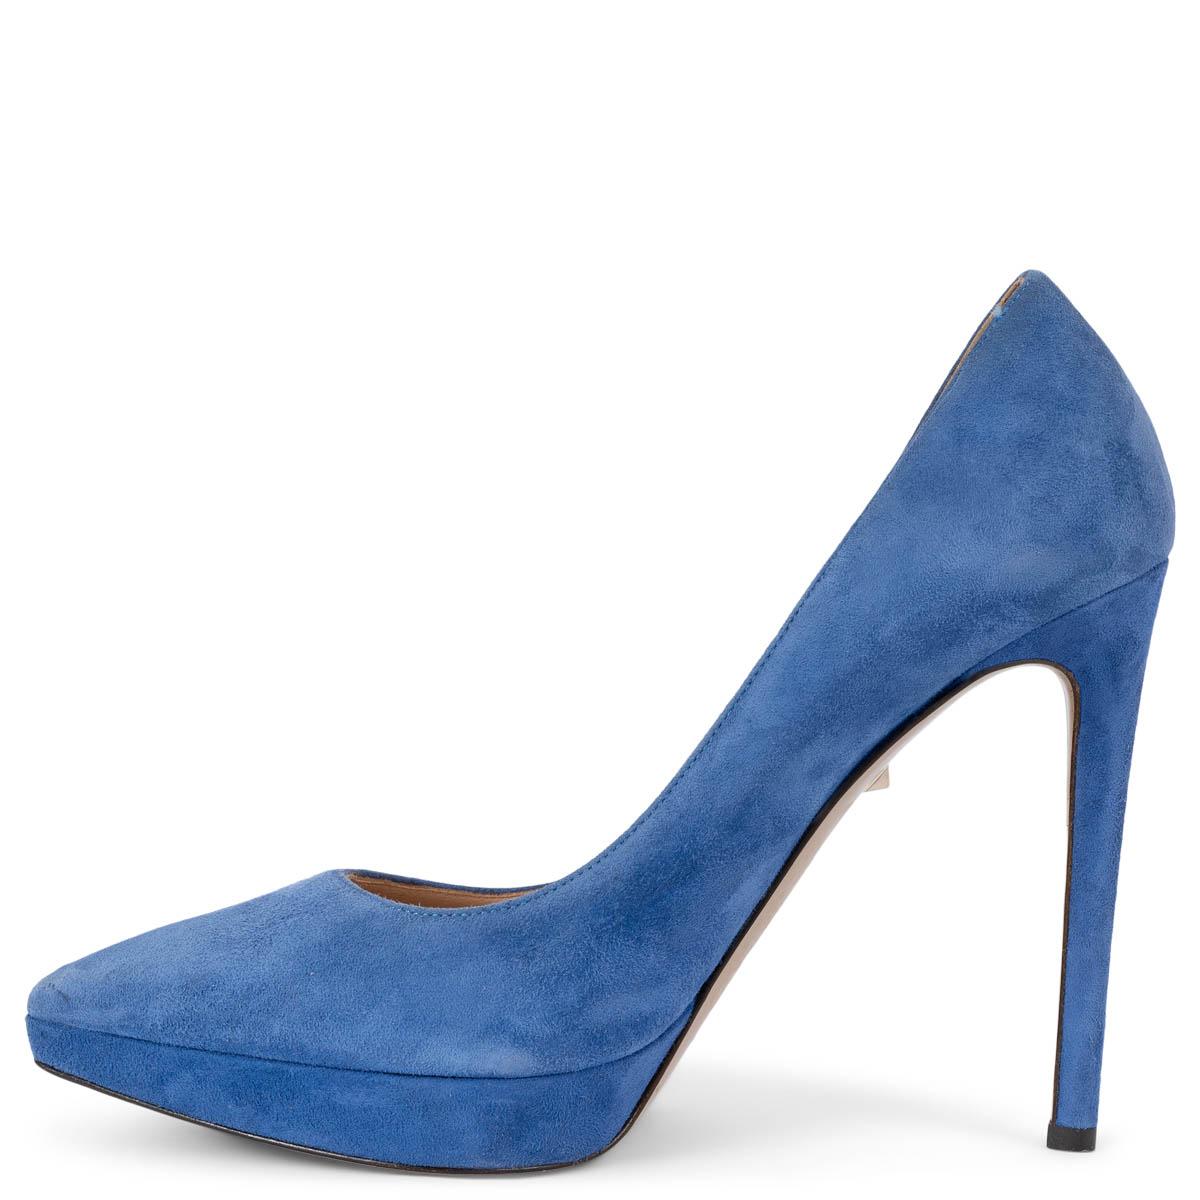 VALENTINO sky blue suede Platform Pumps Shoes 37 In Excellent Condition For Sale In Zürich, CH